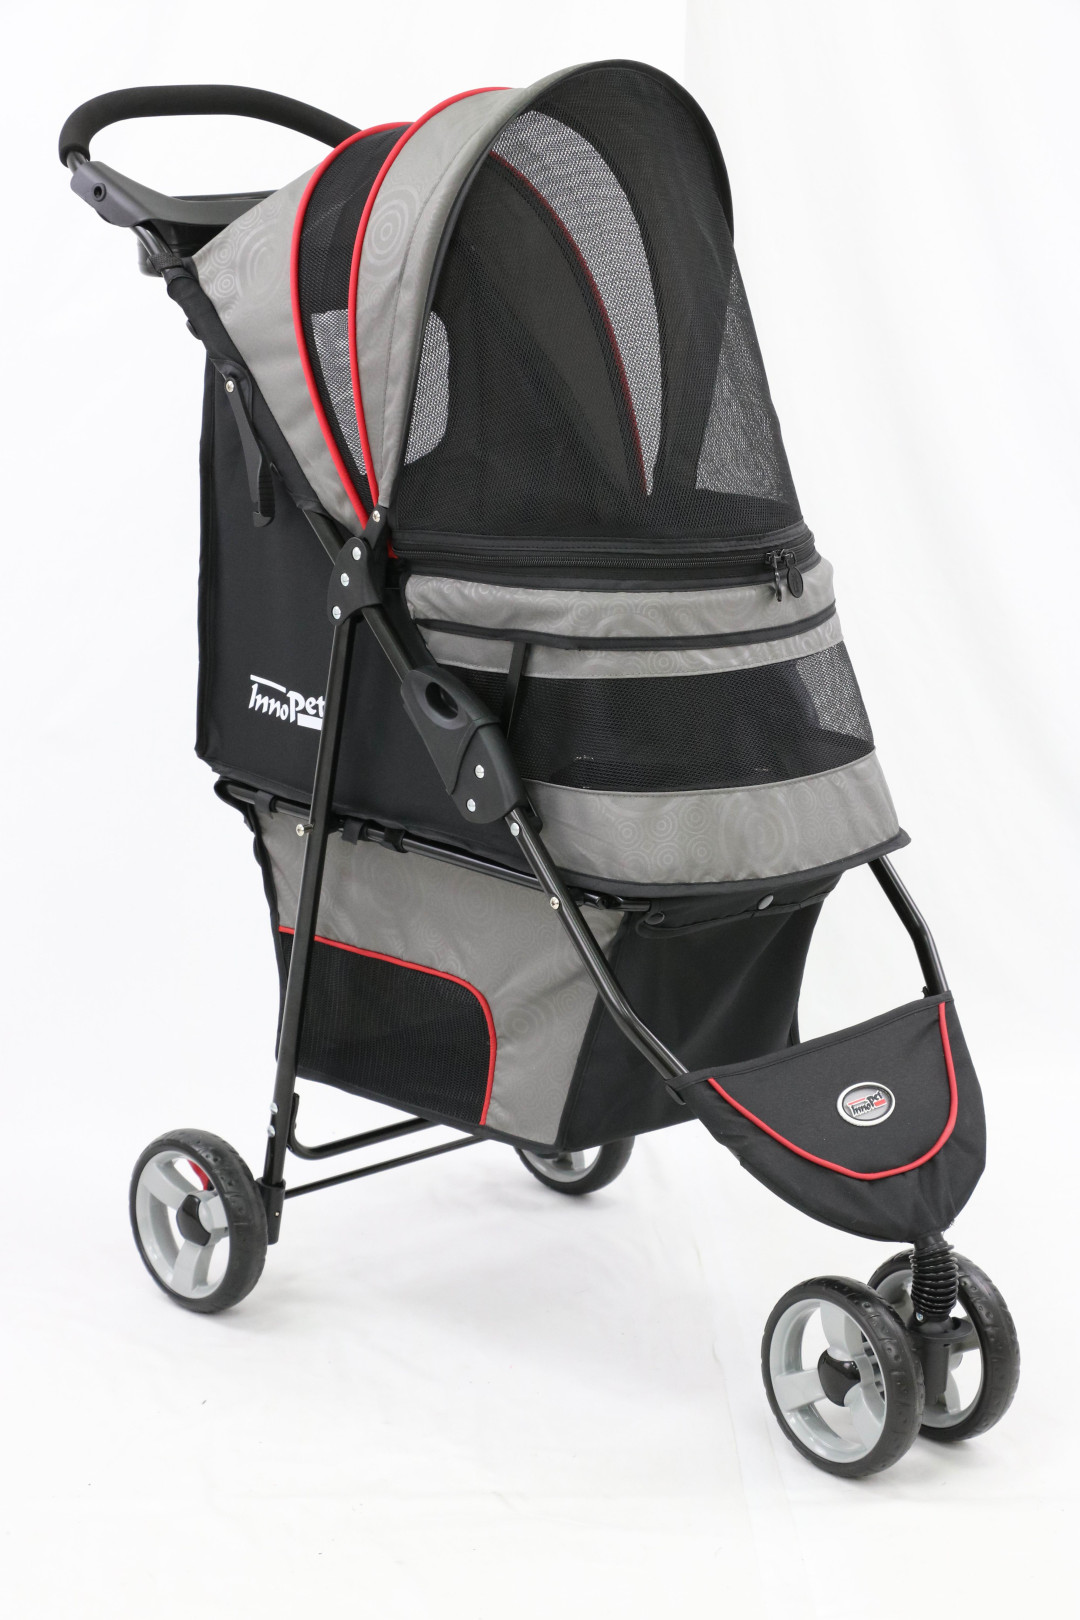 Innopet buggy Avenue shiny grey/red